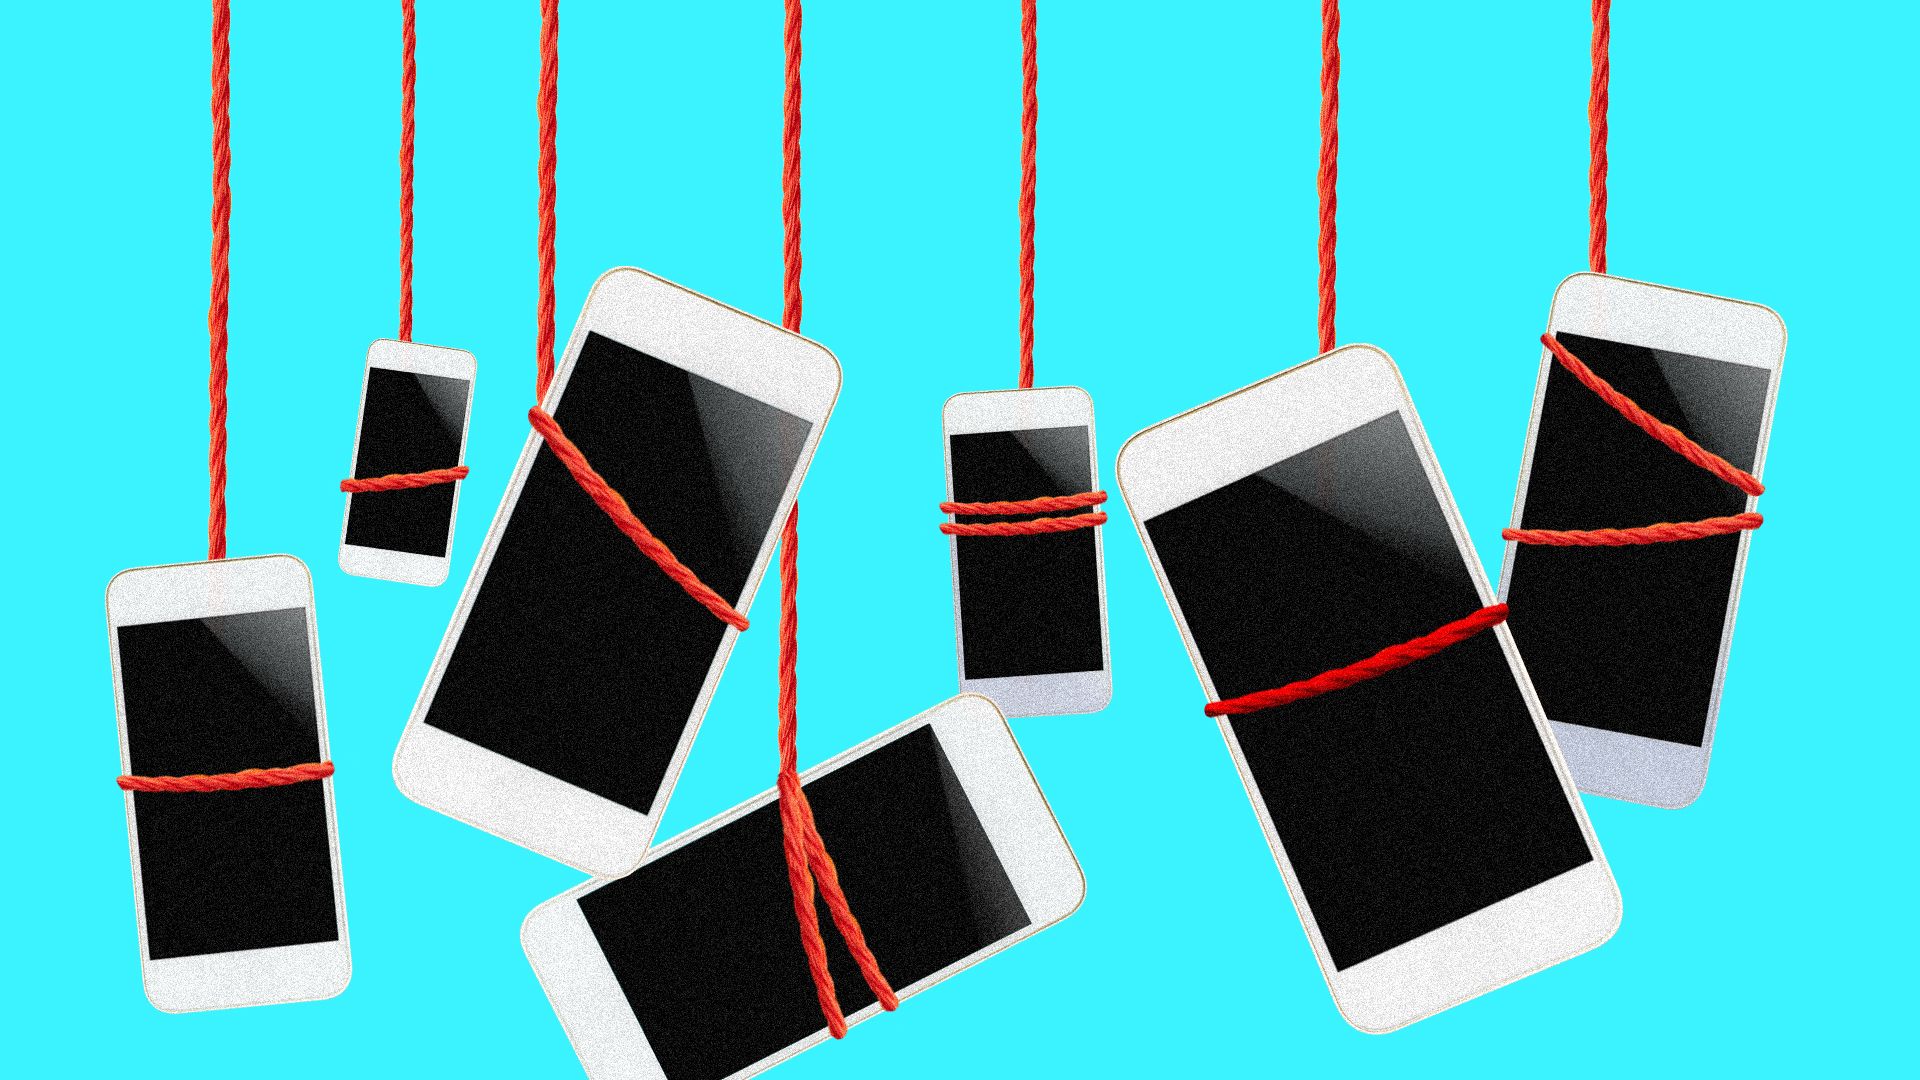 Illustration of smartphones dangling from ropes